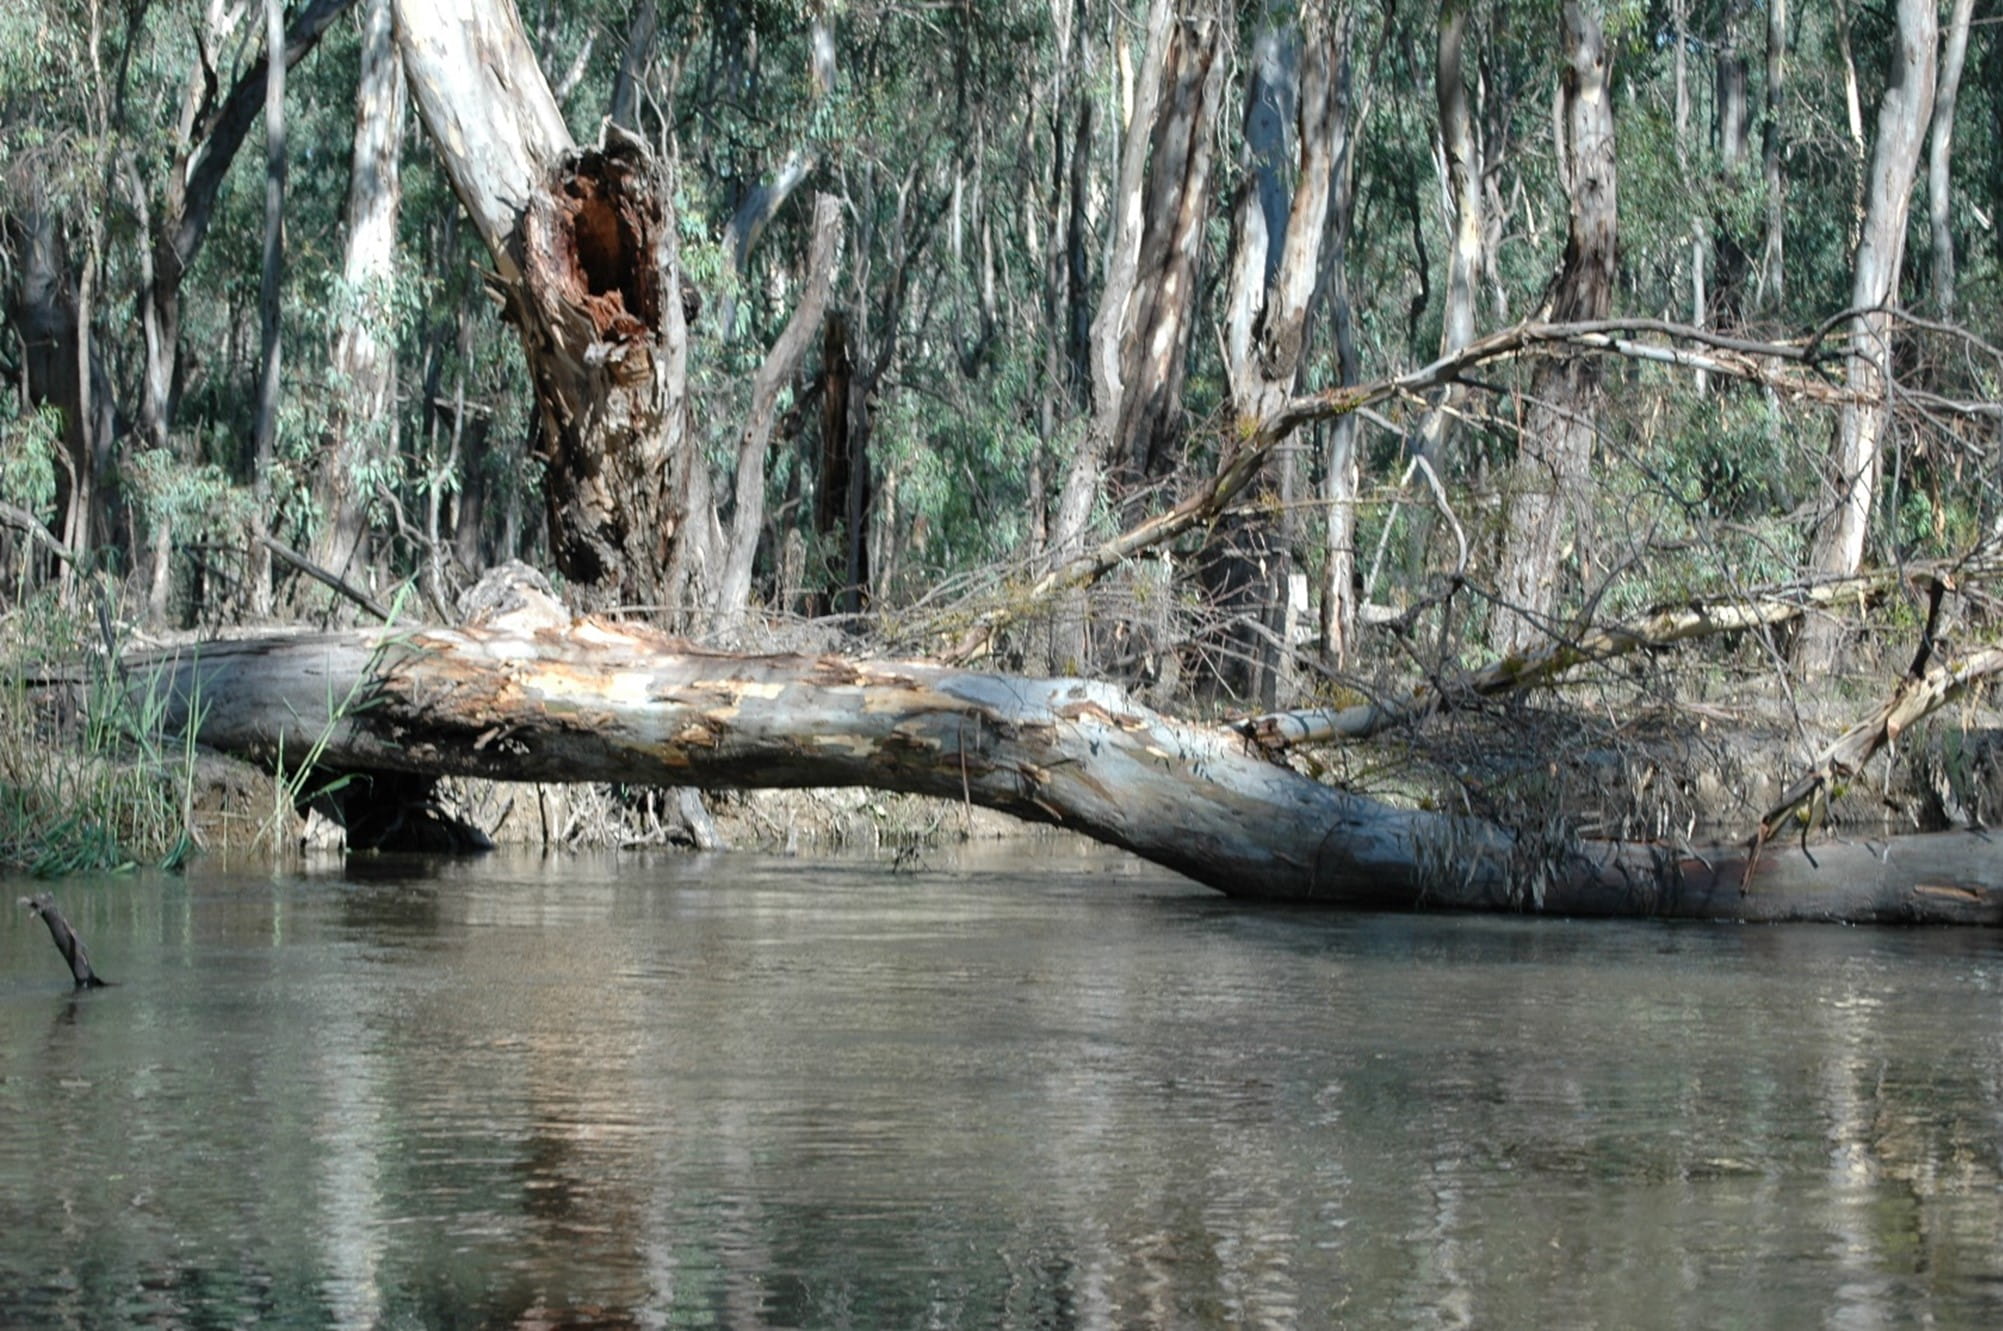 The fallen limb of a large river red gum has fallen into the water